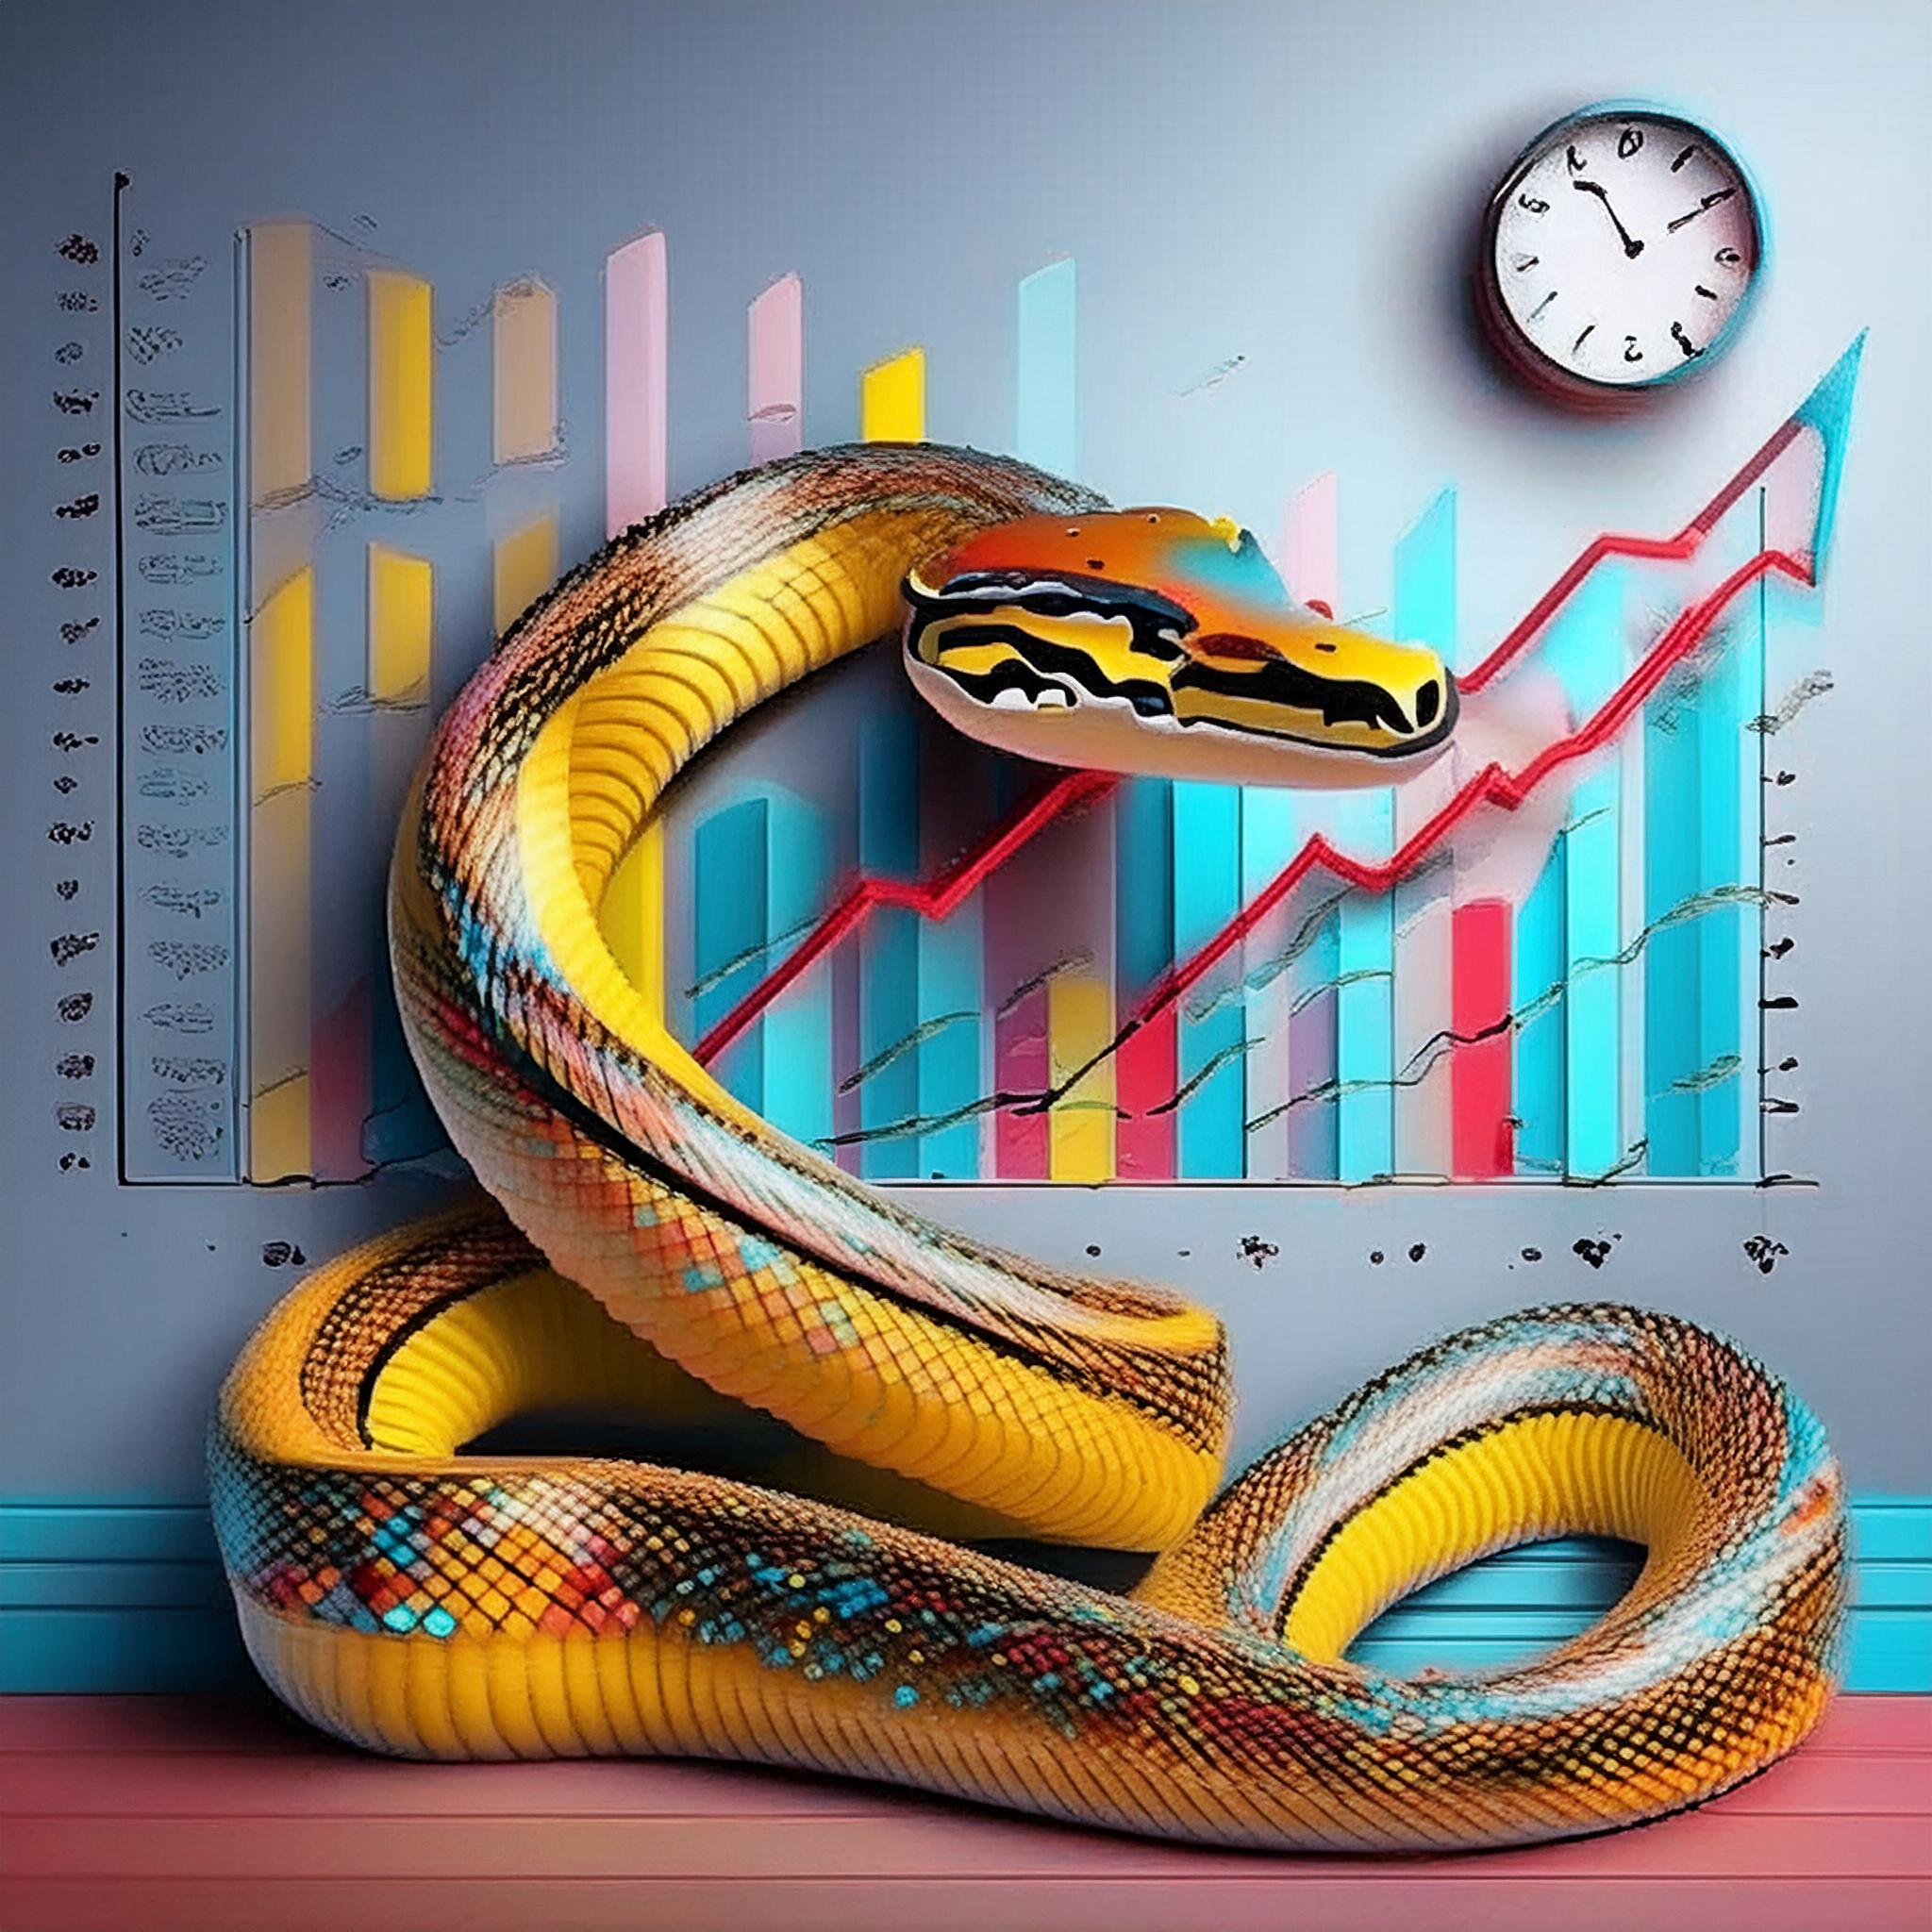 AI prompt: a python snake drawing a line plot, with a large clock on the wall